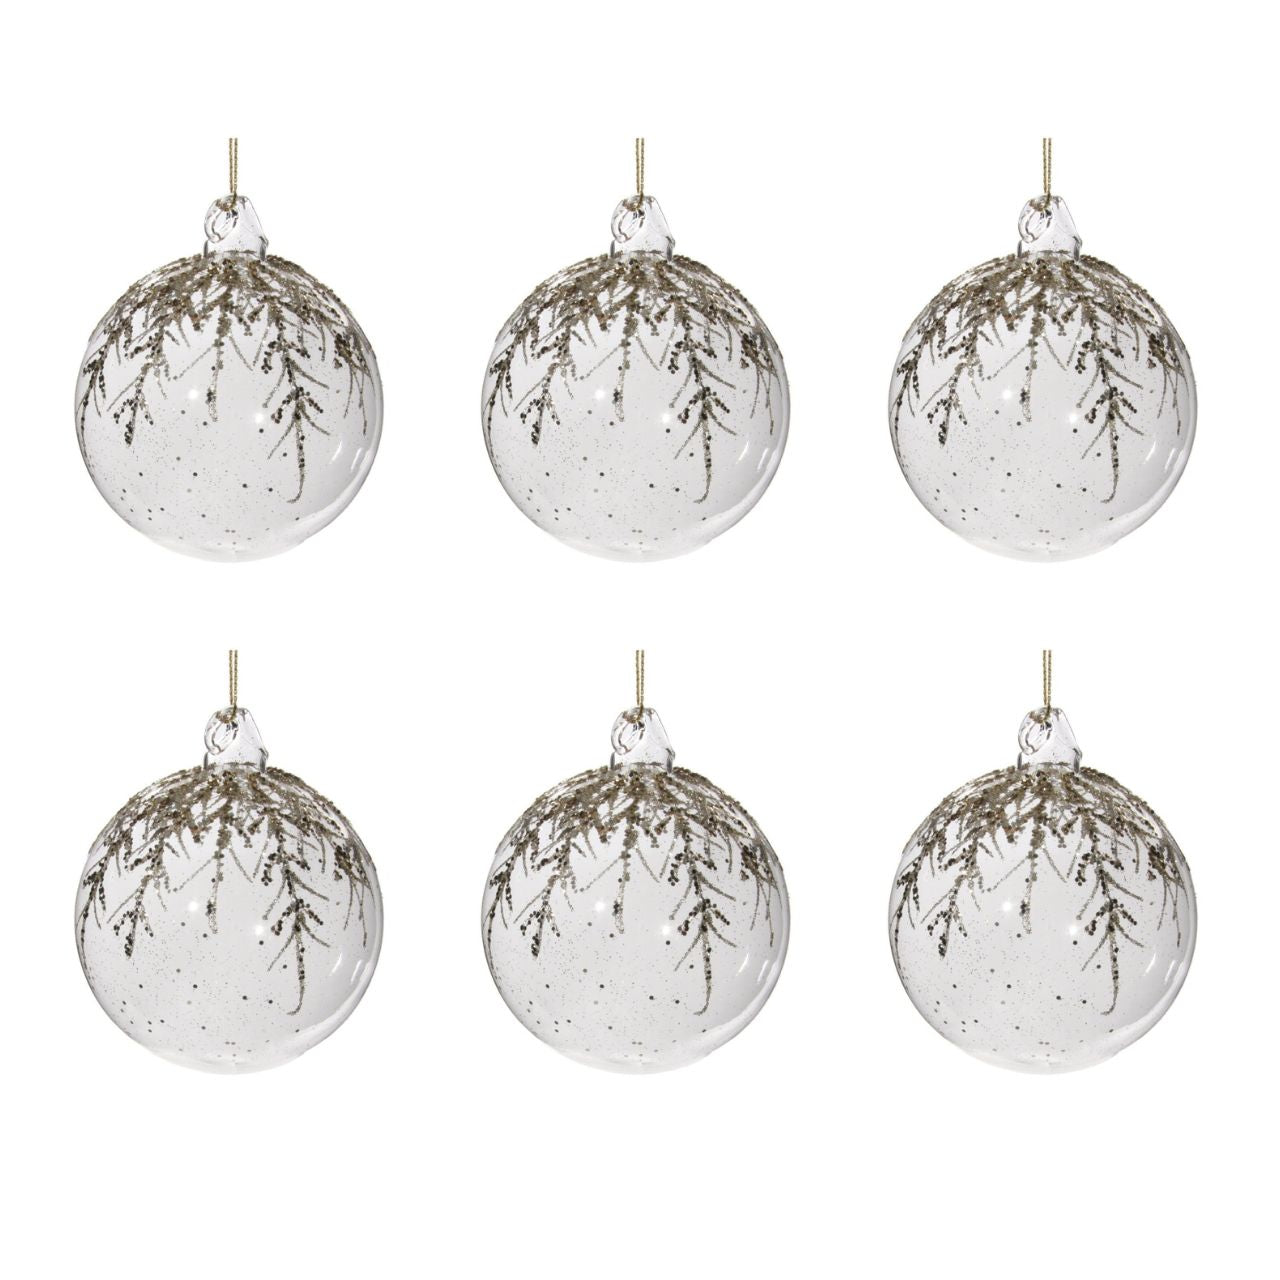 Shishi Clear Glass Ball with Glitter Fern Christmas Hanging Ornament Set of 6  Browse our beautiful range of luxury festive Christmas tree decorations, baubles & ornaments for your tree this Christmas.